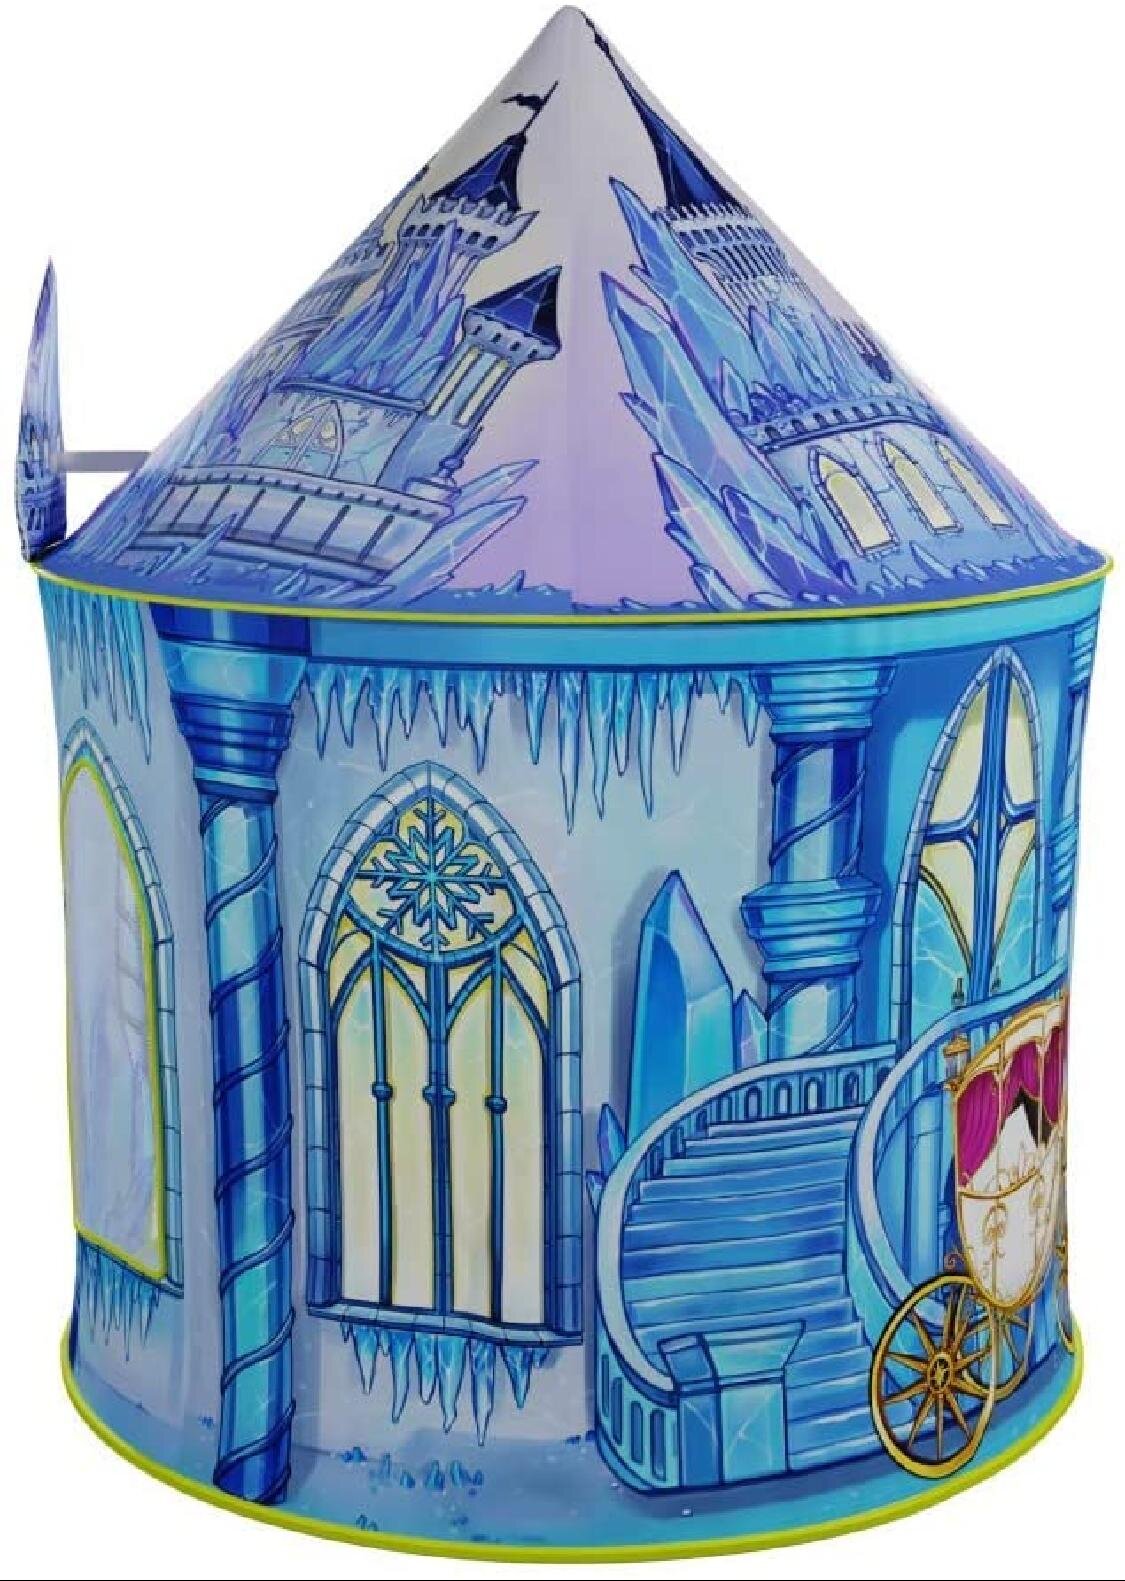 Storage Bag Unique Castle Design for Indoor and Outdoor Fun Ice Castle Princess Play Tent Imaginative Games & Gift Foldable Playhouse Toy 